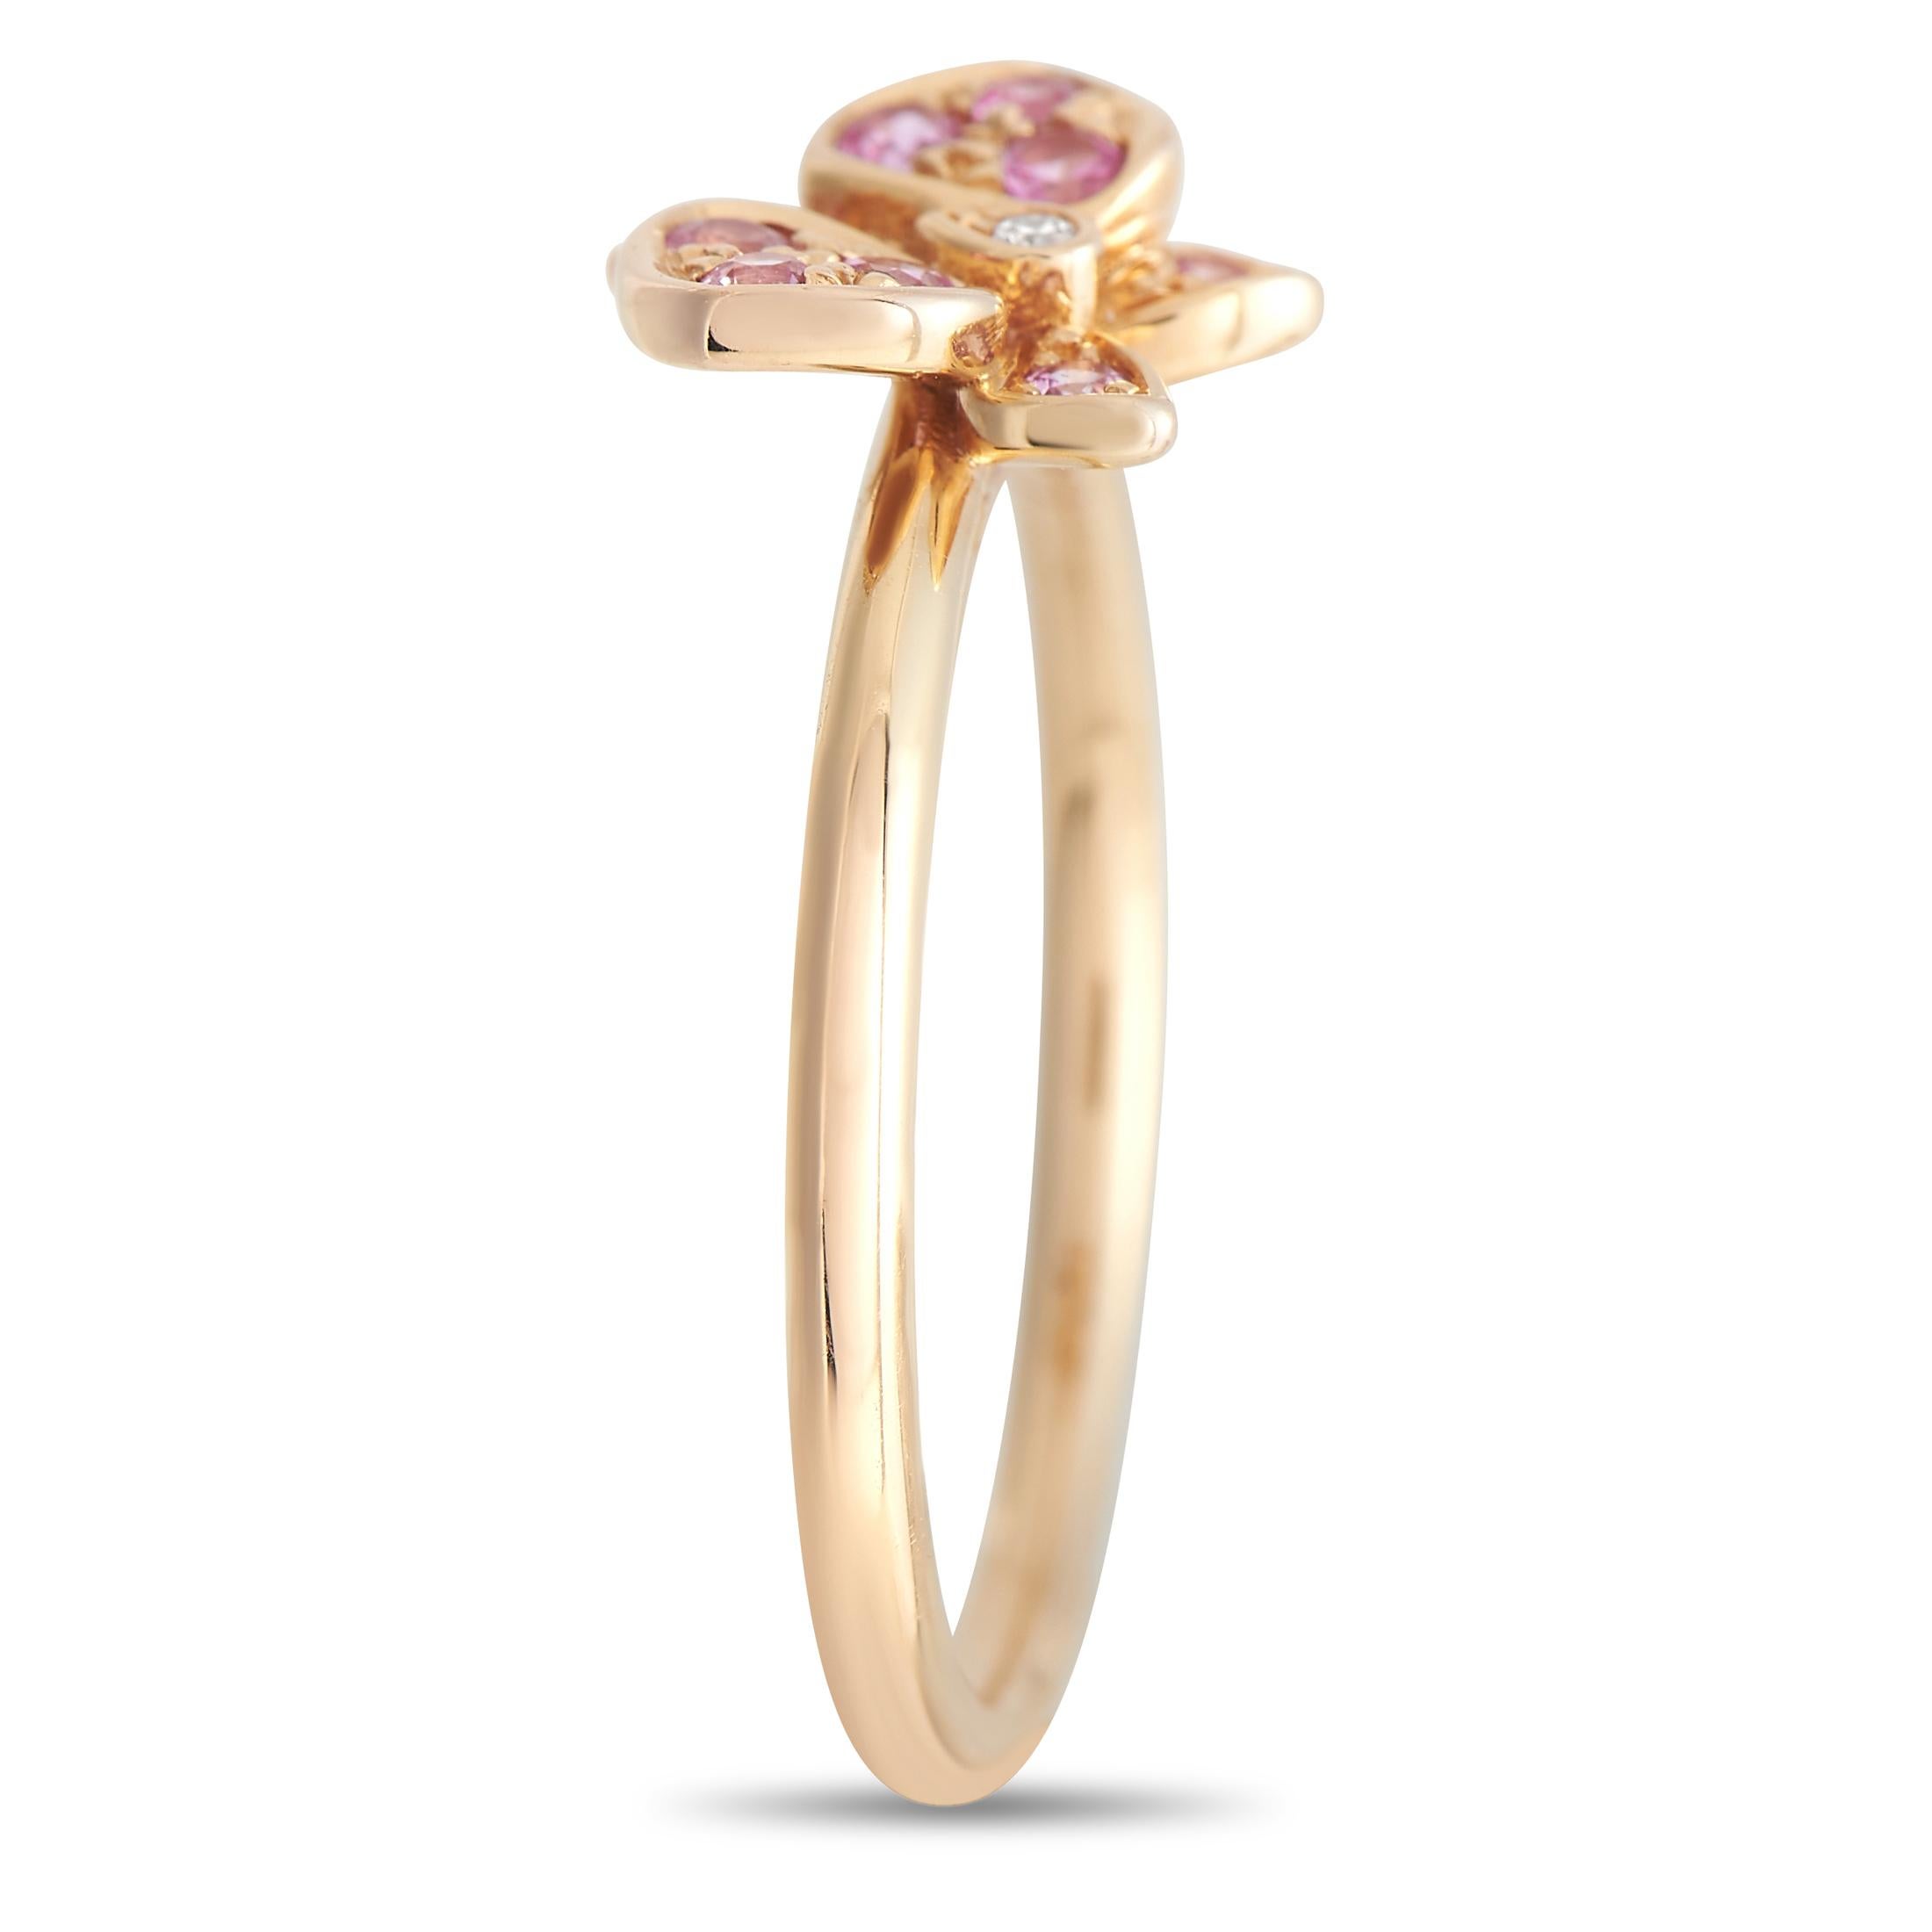 This Cartier Caresse D'Orchidees is a delicate piece that is incredibly elegant in design. At the top of the 18K Yellow Gold setting, a stunning array of pink diamonds sparkle and shine from their place within a dainty orchid-shaped design. This